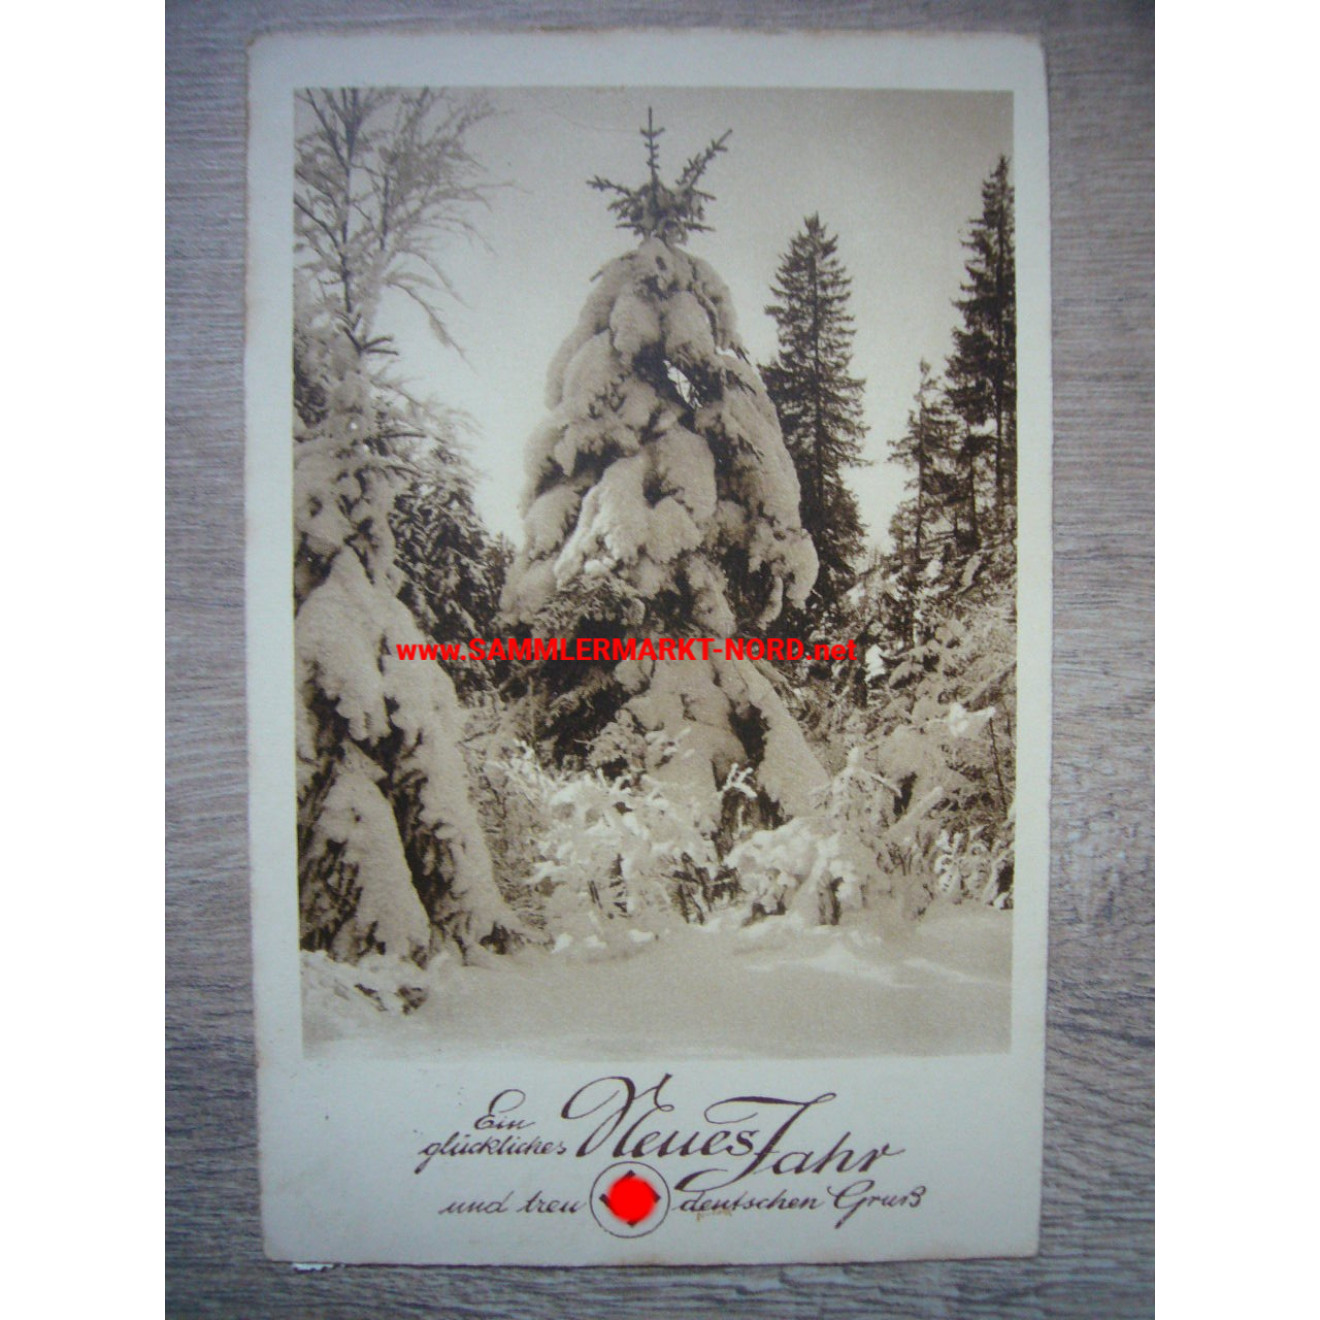 New year and true German greeting - postcard